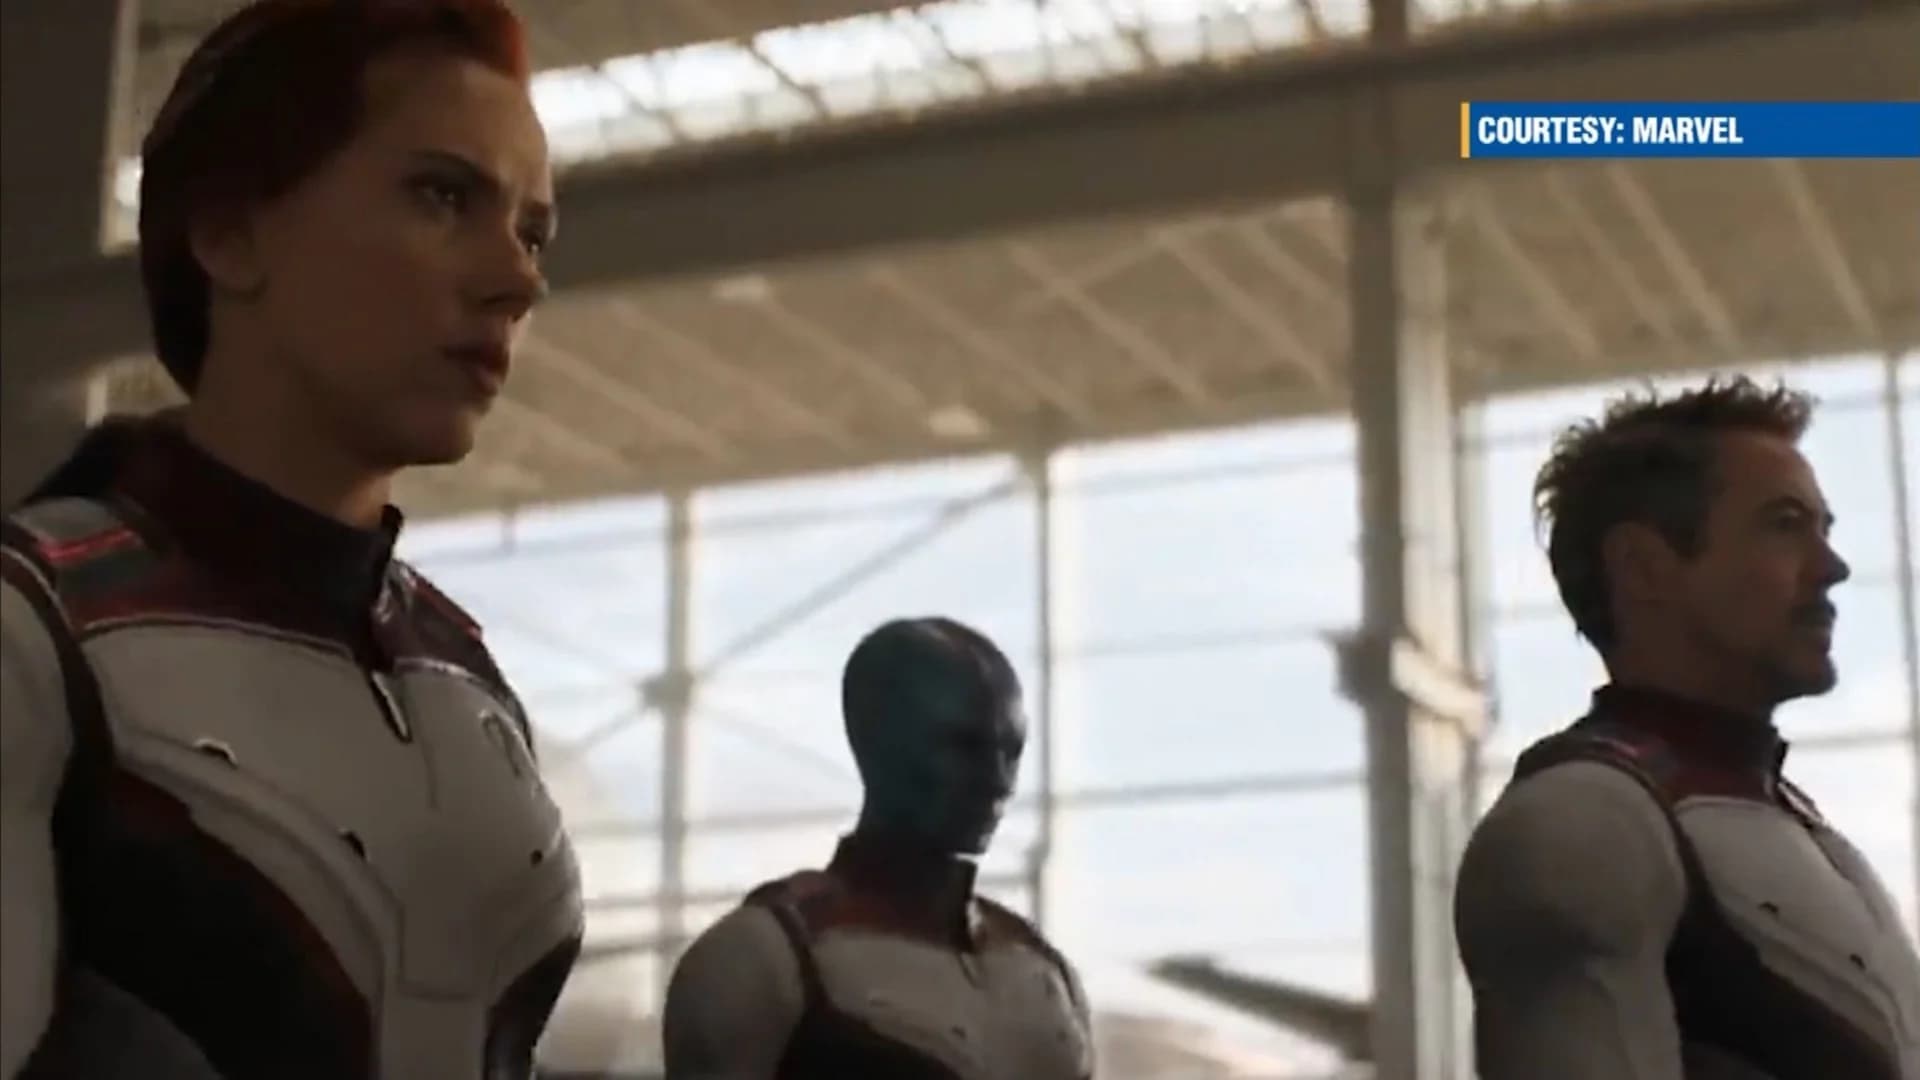 The latest ‘Avengers’ trailer has dropped and fans are hyped